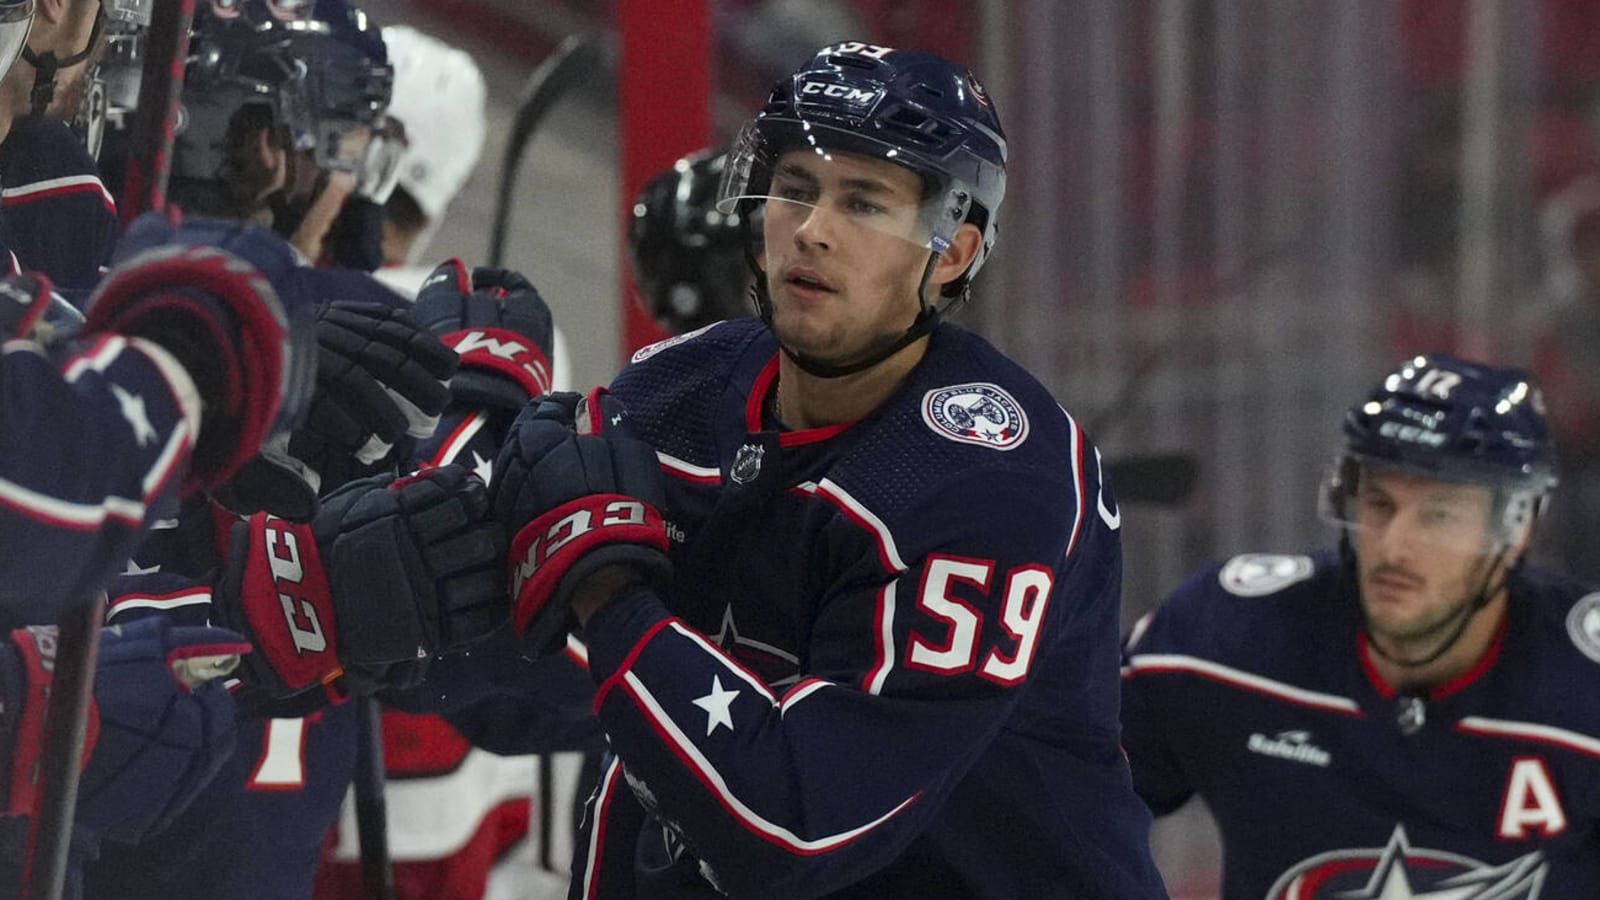 Blue Jackets sign forward to one-year contract extension